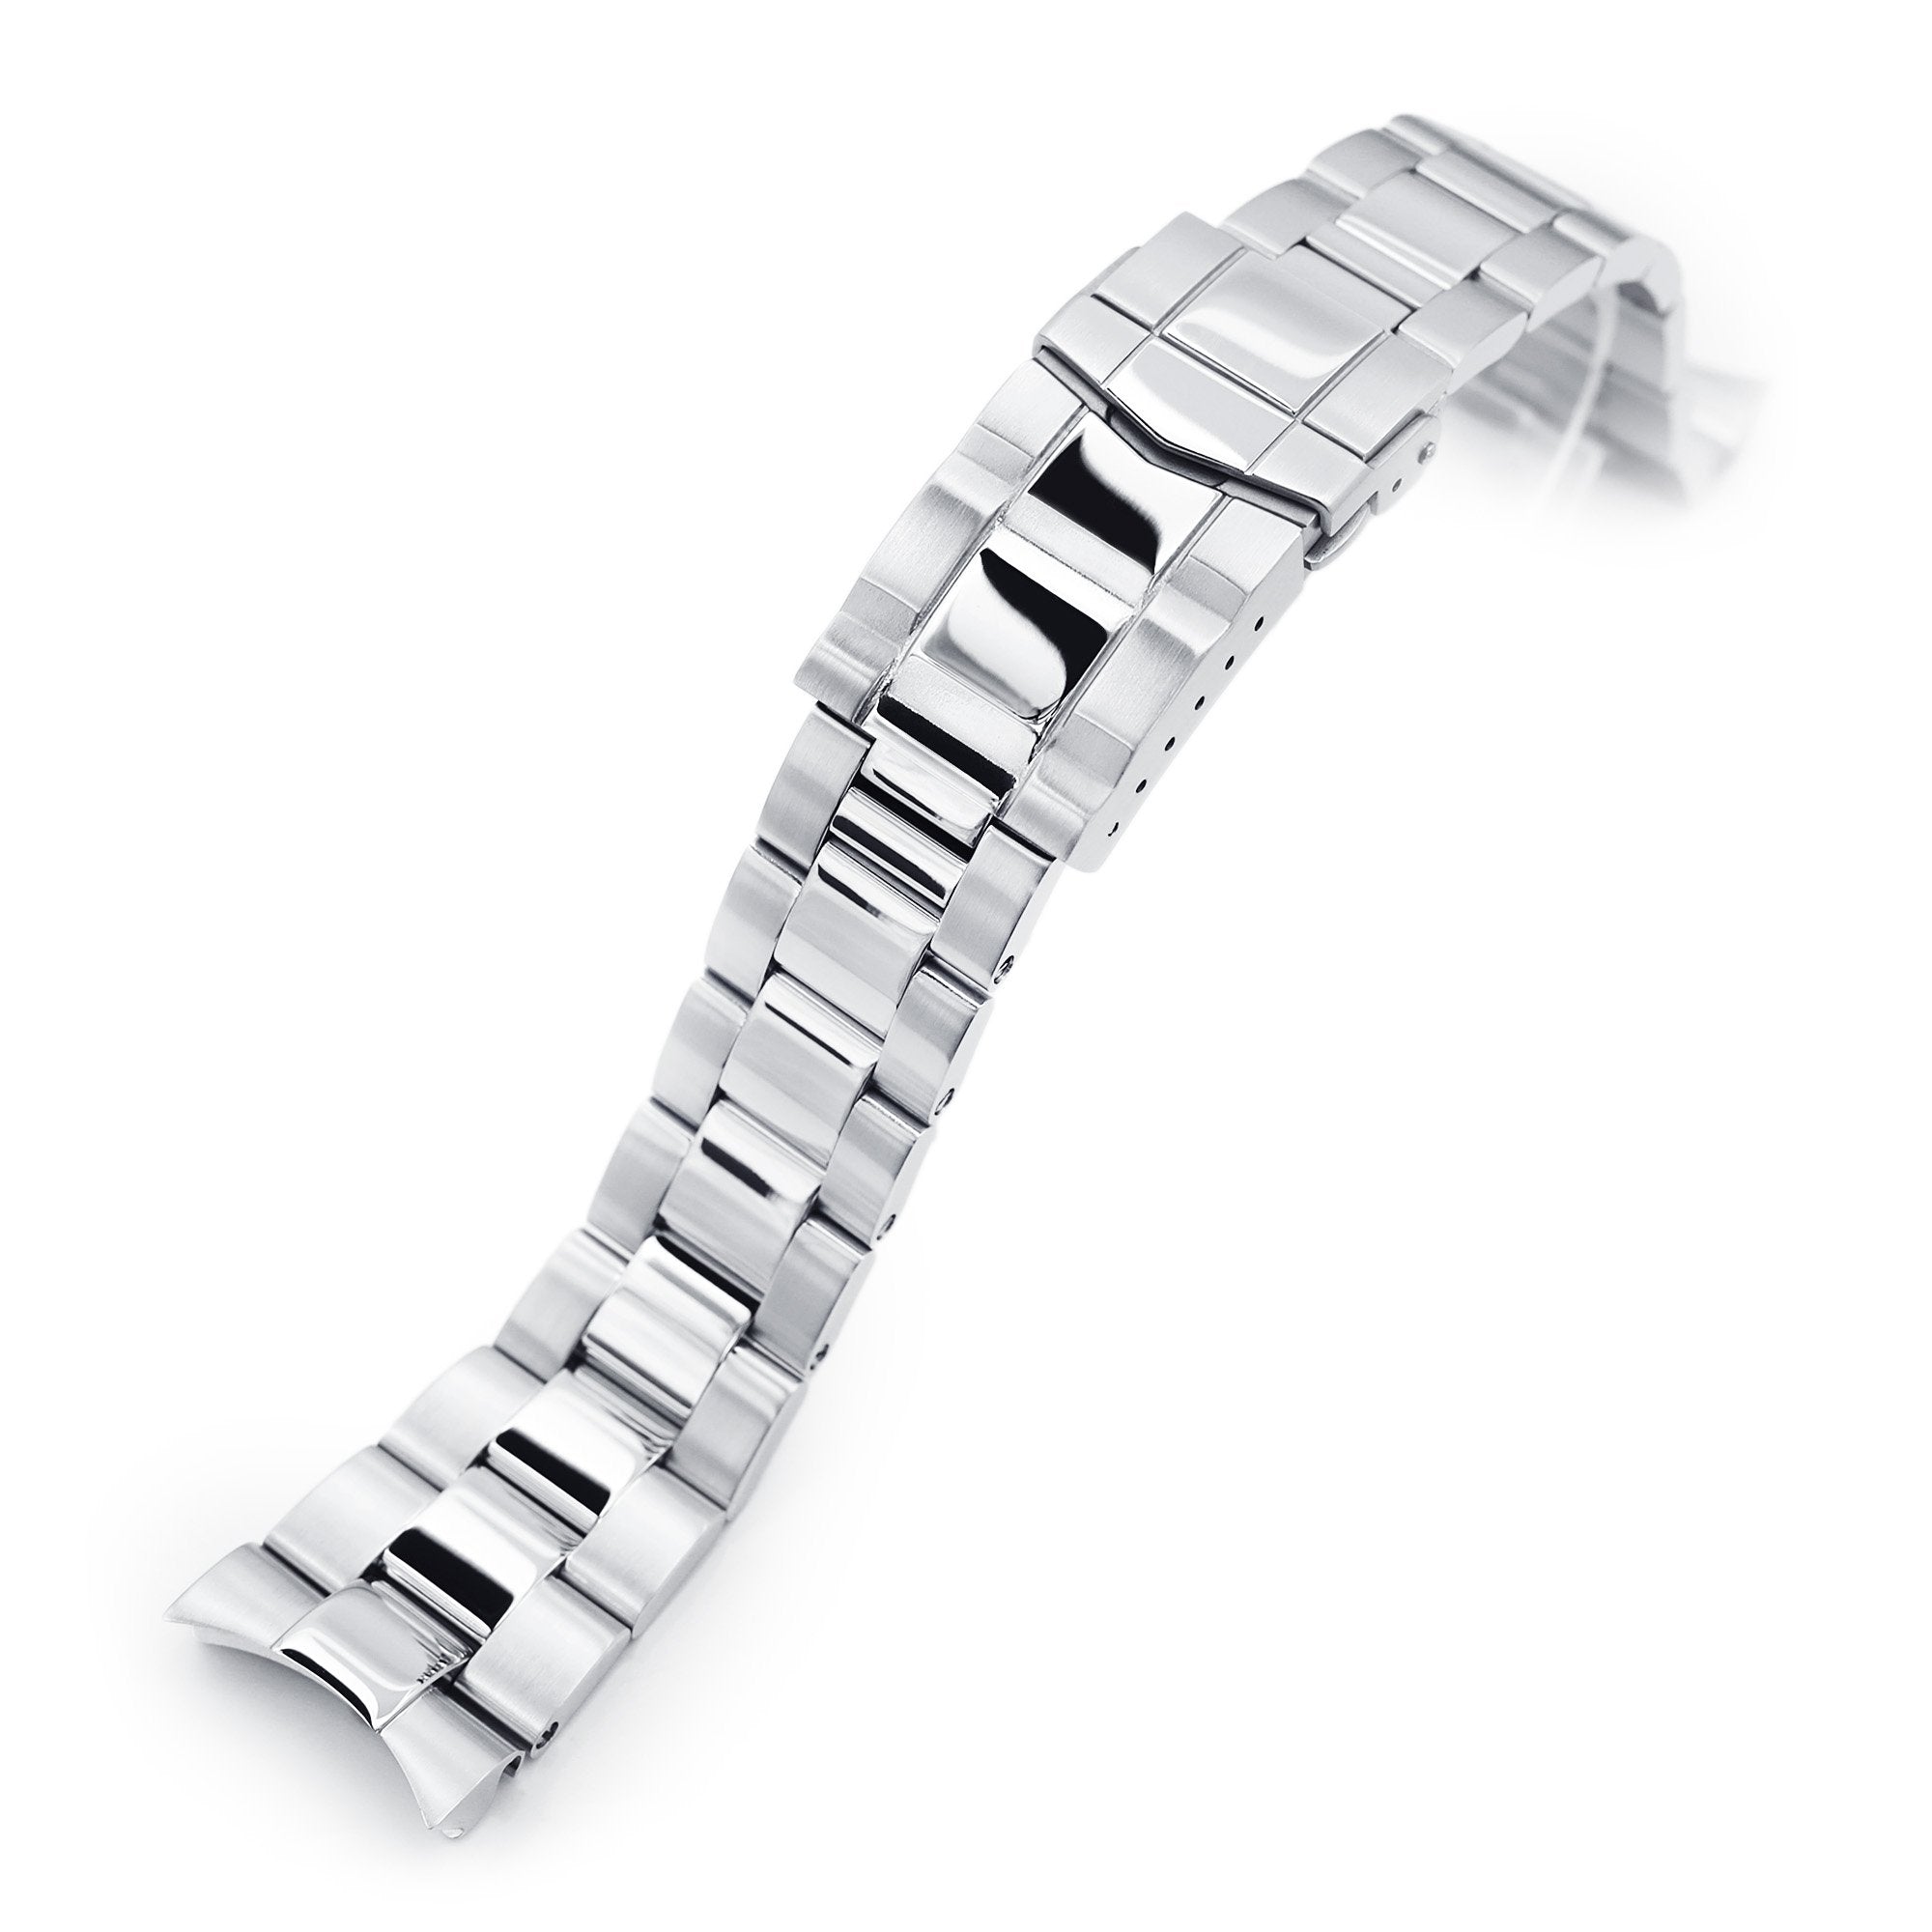 22mm Super-O Boyer 316L Stainless Steel Watch Bracelet for Orient Kamasu Brushed with Polished Center SUB Clasp Strapcode Watch Bands